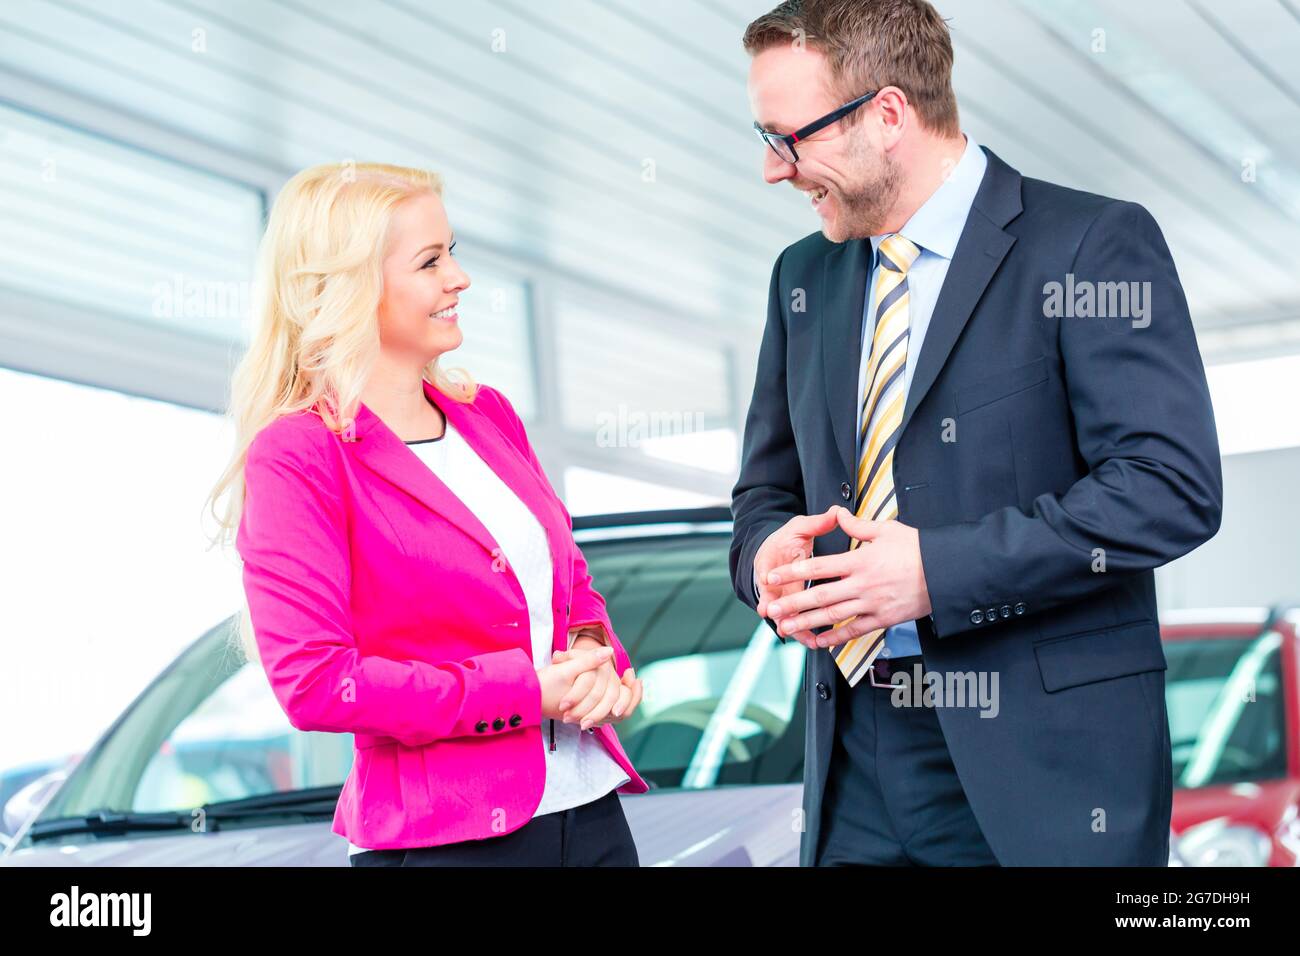 Woman buying car at dealership and consulting salesman Stock Photo